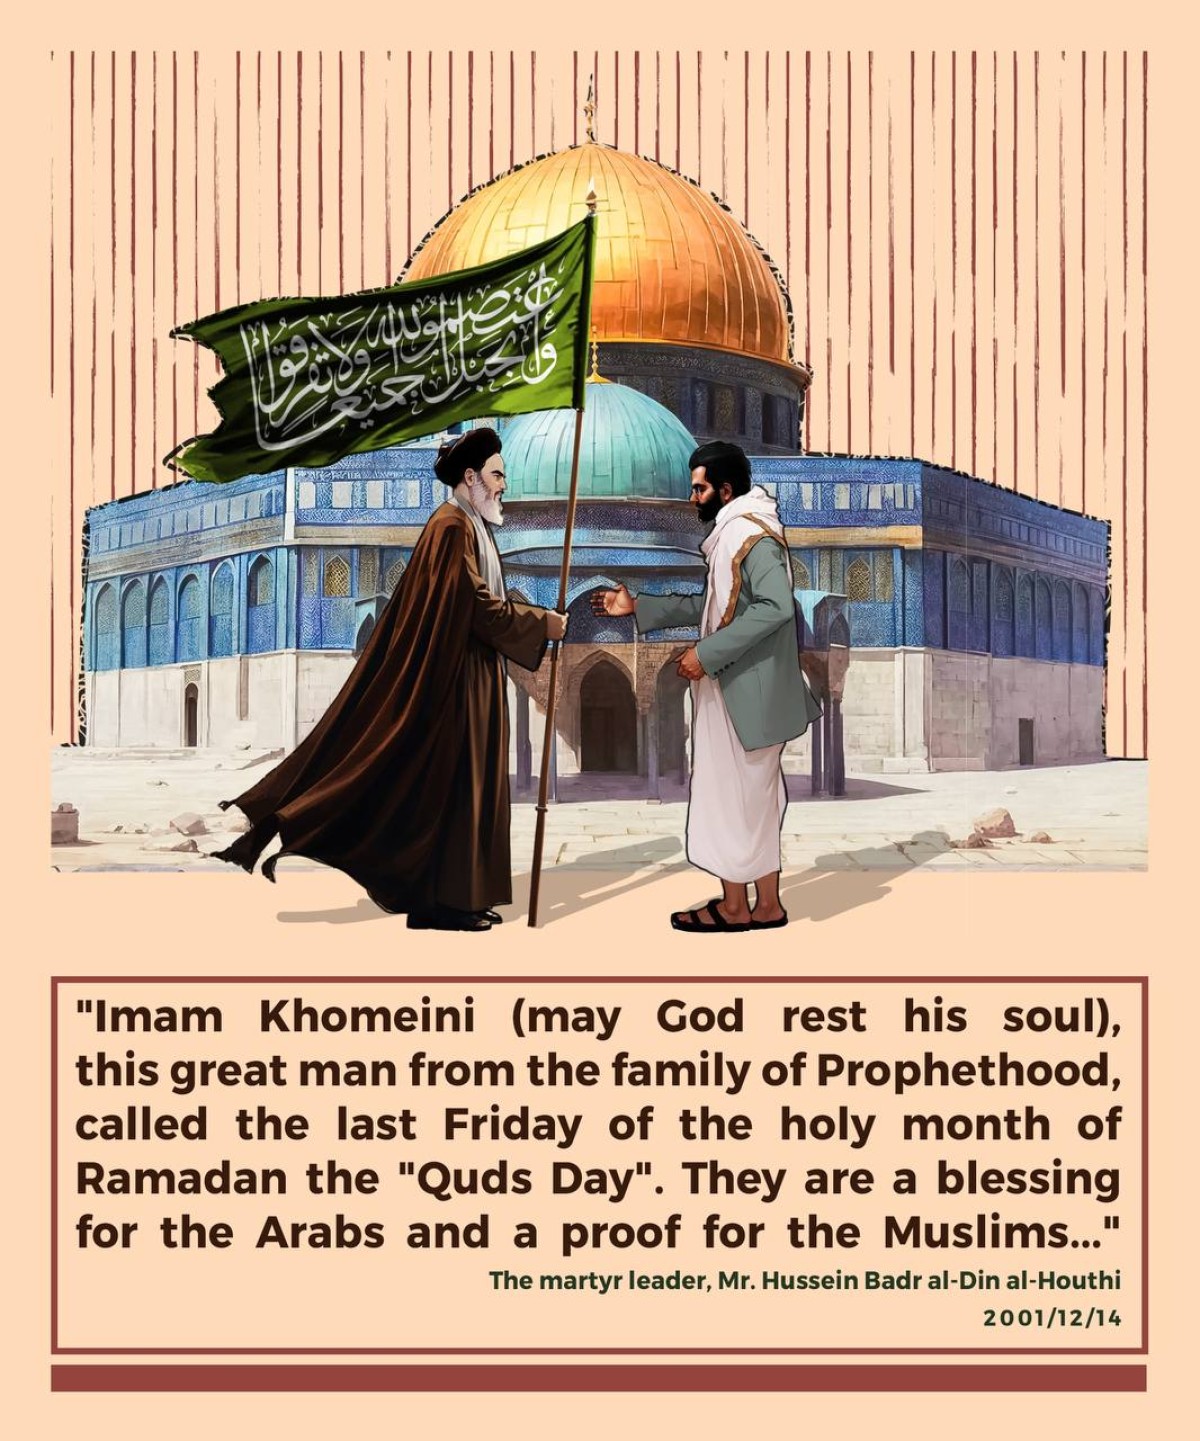 last Friday of the holy month of Ramadan the Quds Day